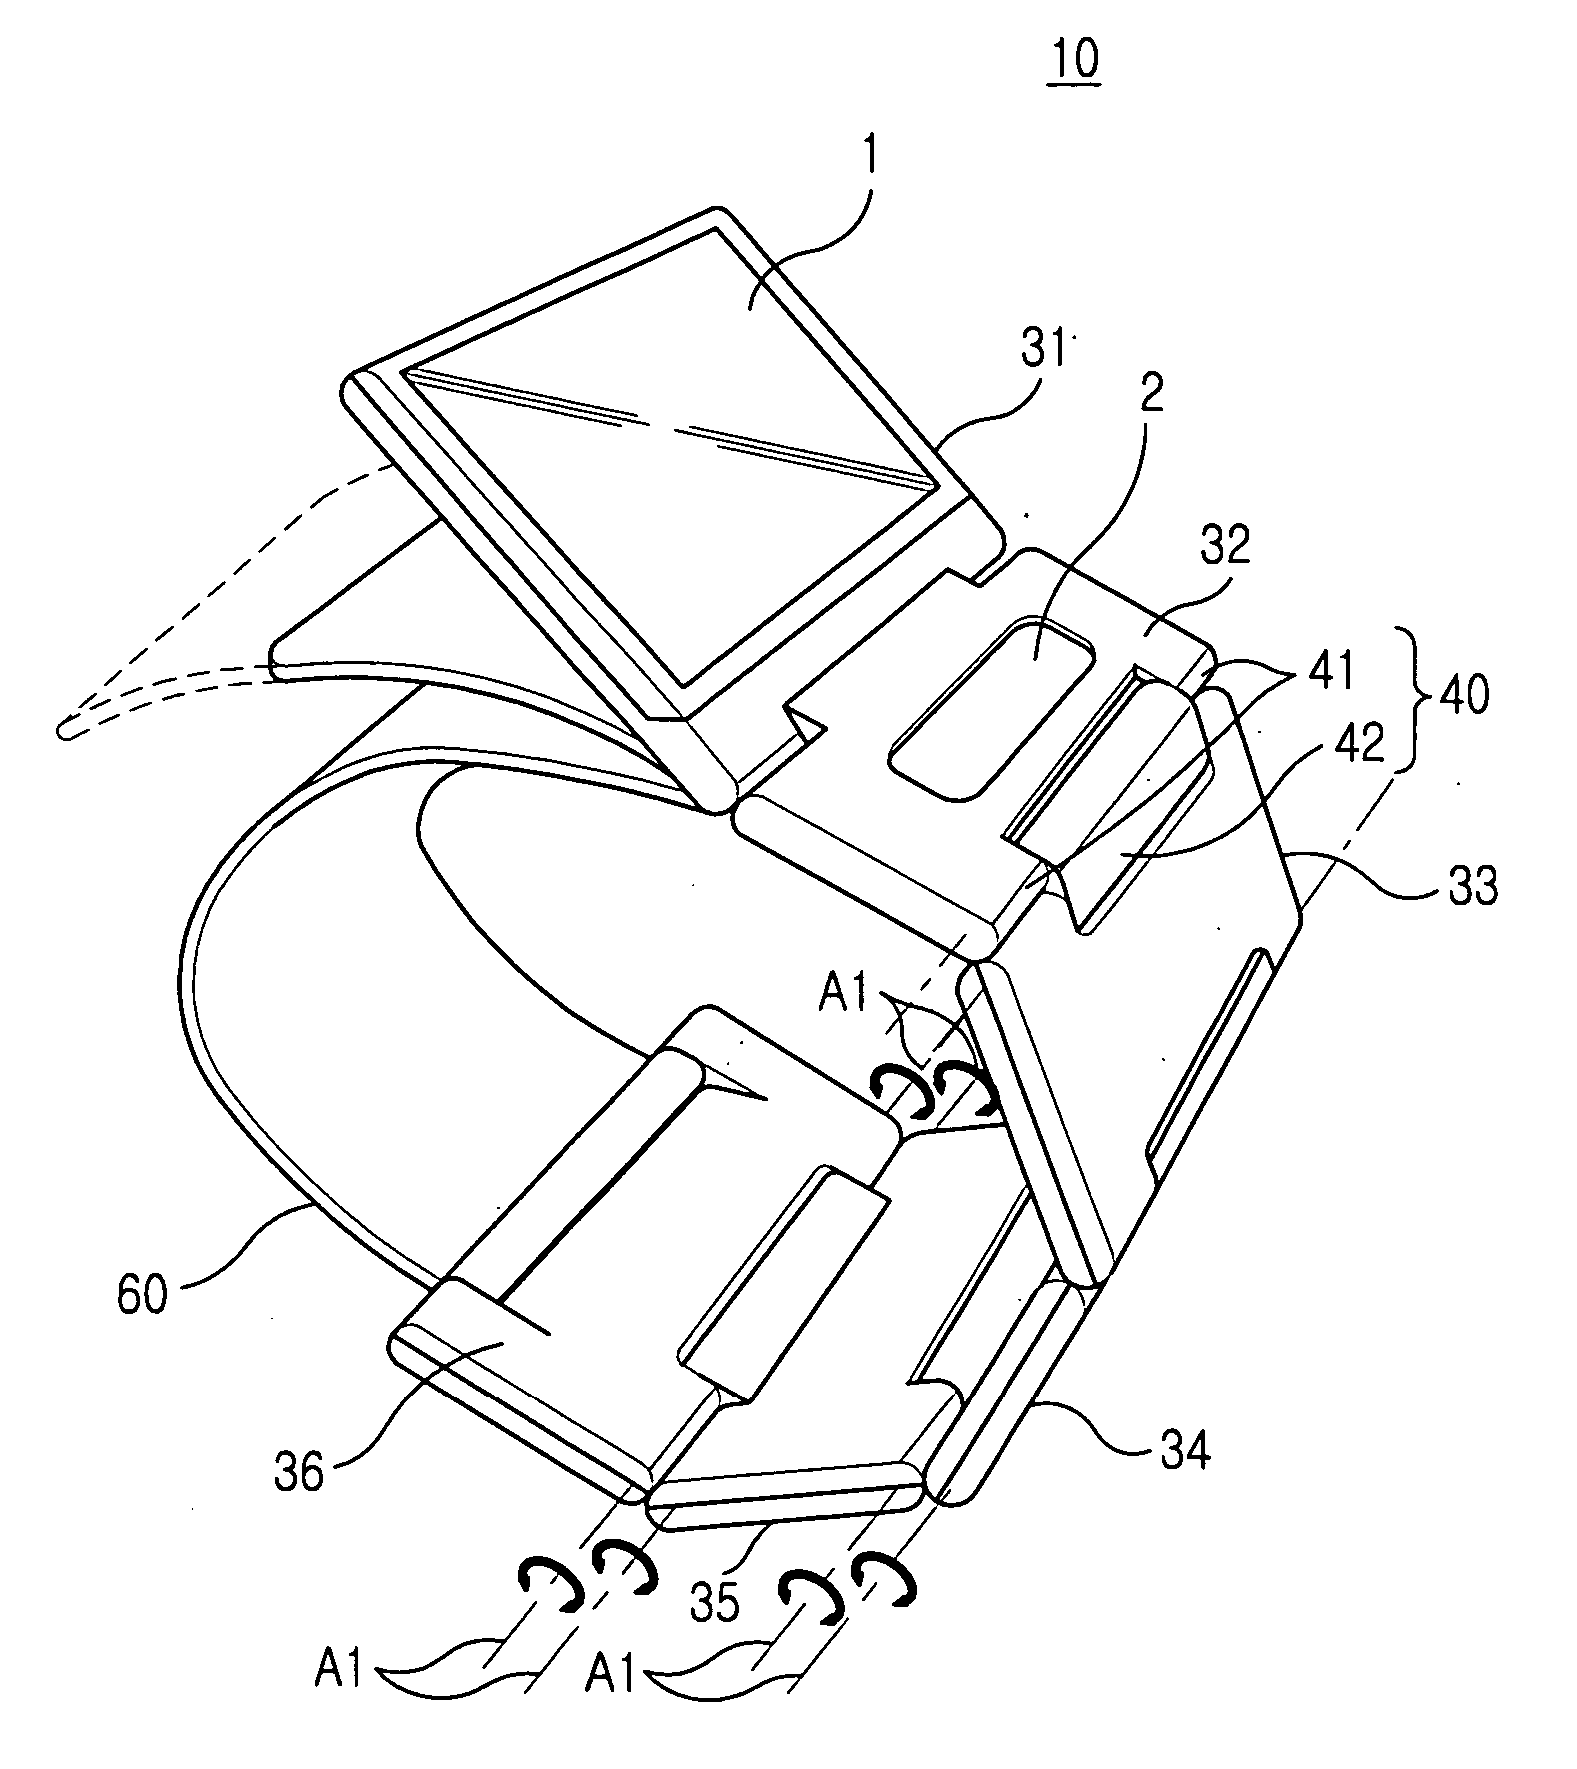 Portable terminal having a plurality of hinged housing sections